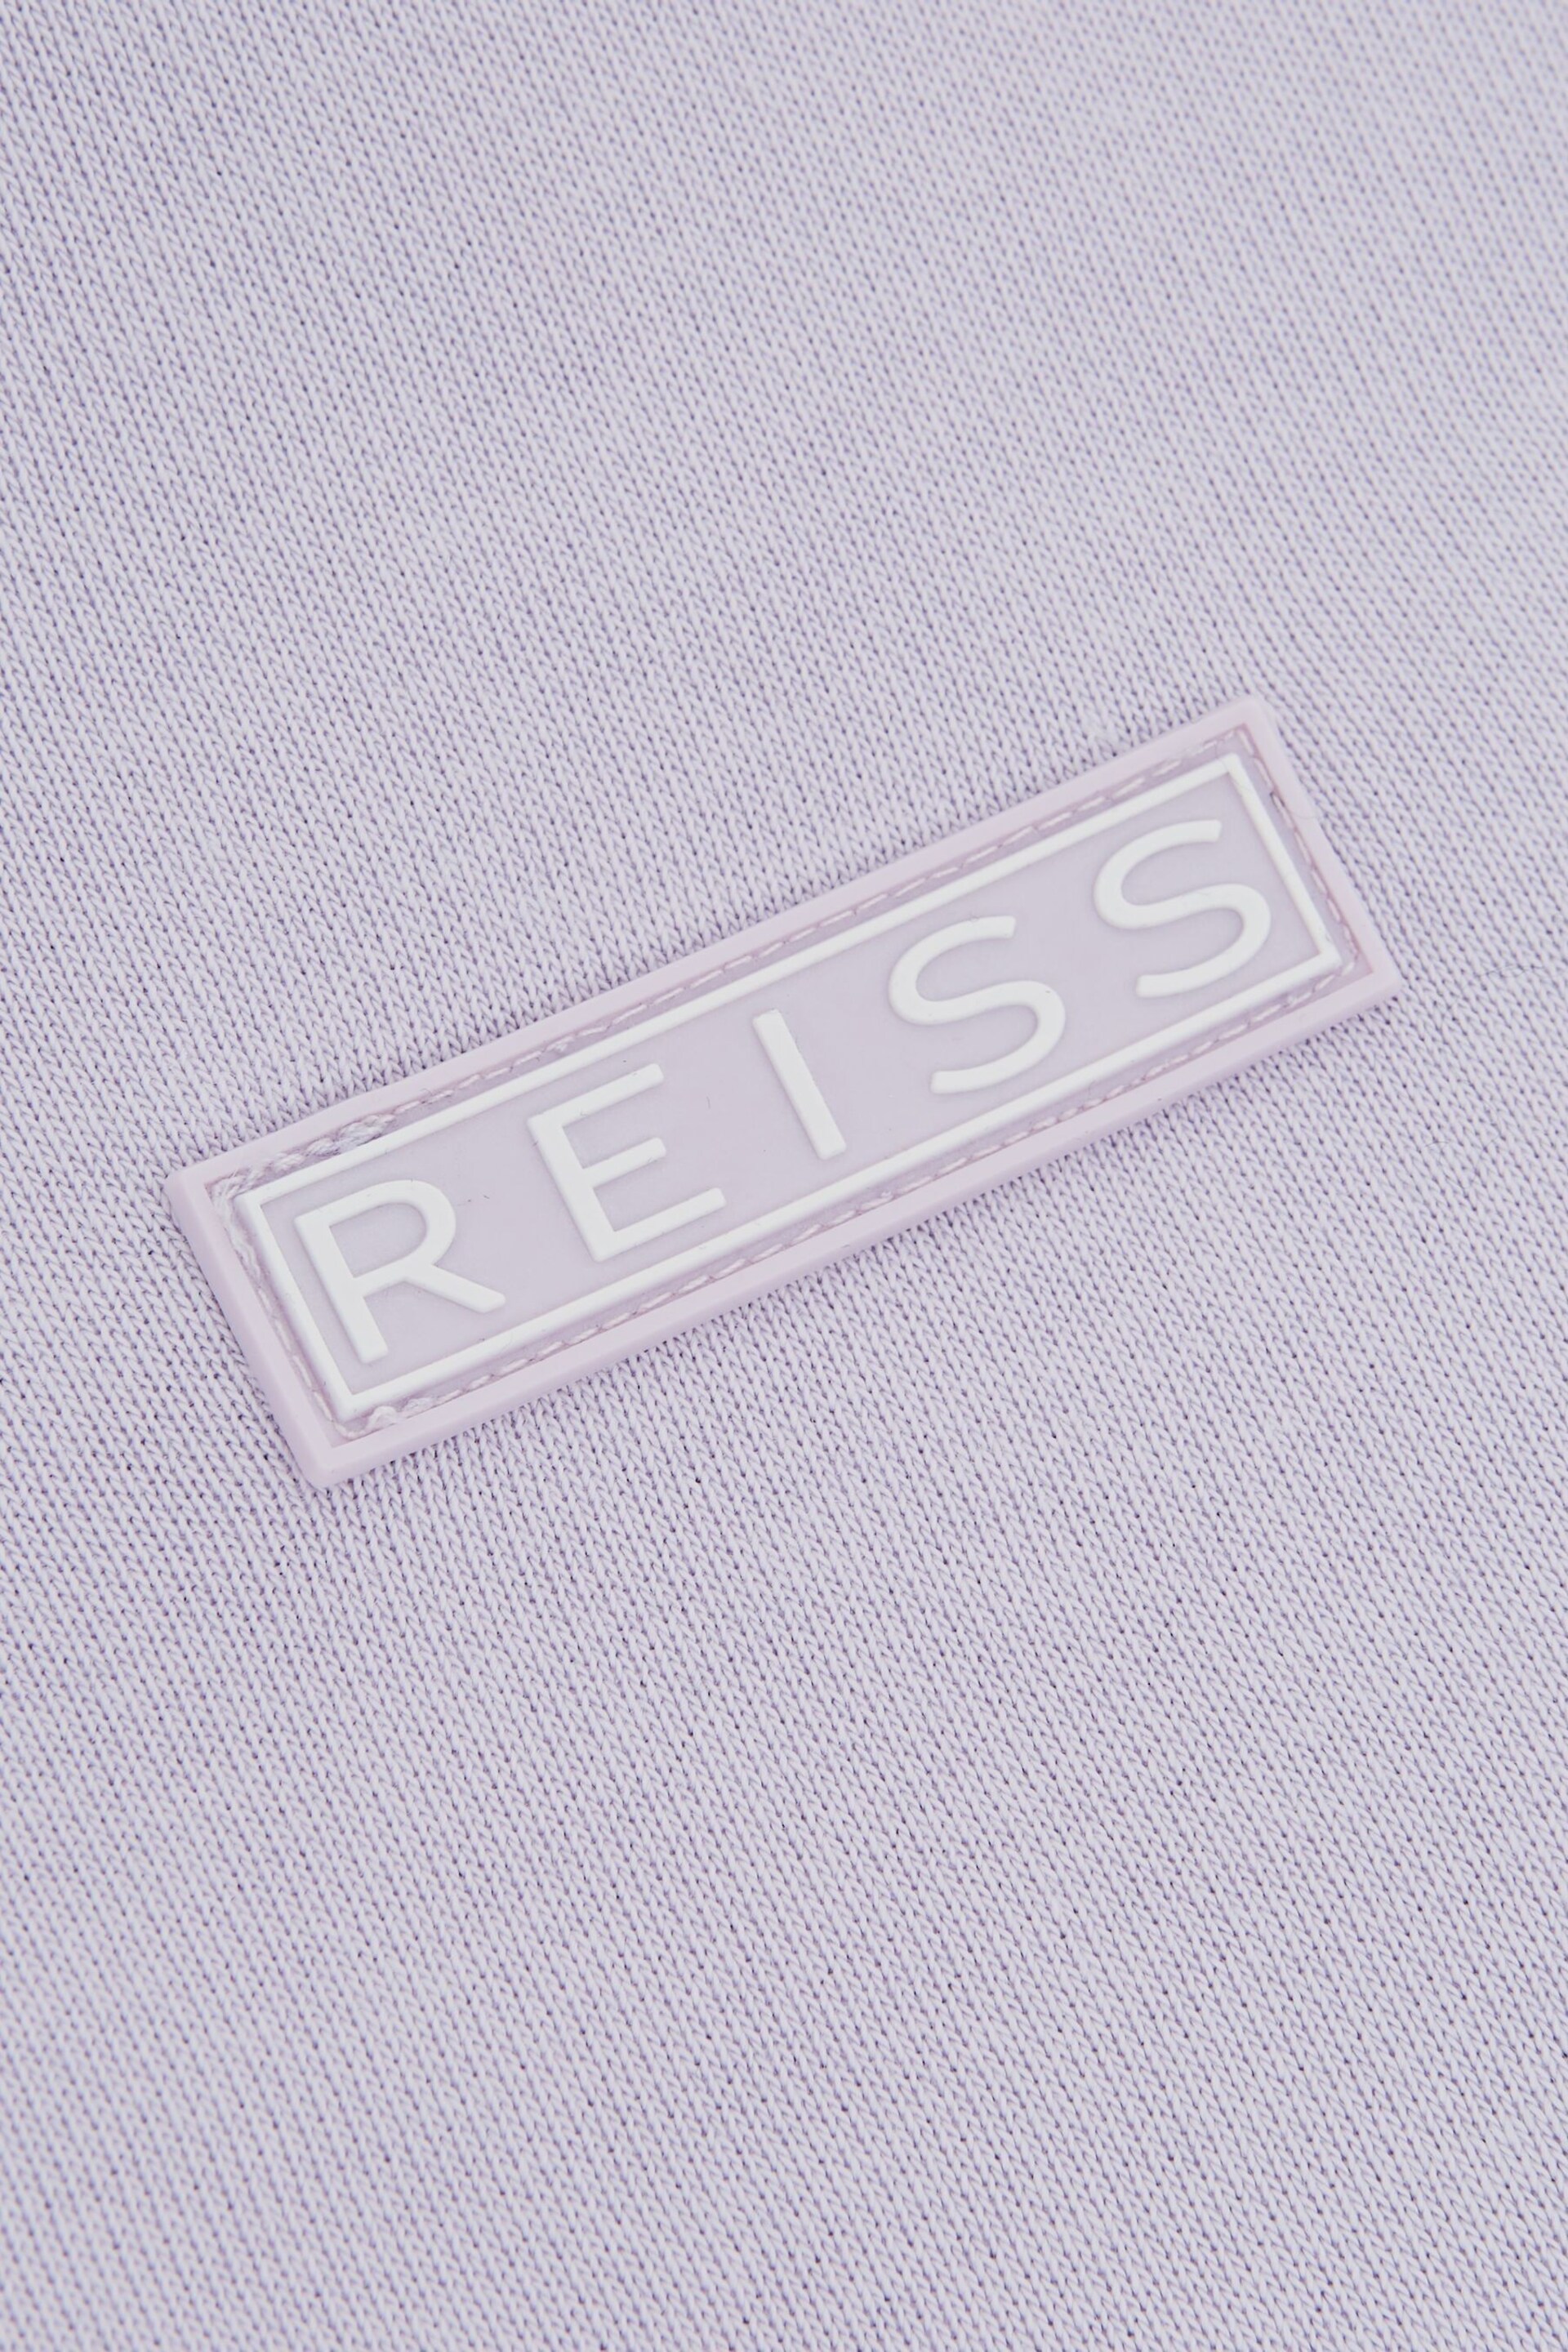 Reiss Lilac Maeve Junior Relaxed Jersey Dress - Image 7 of 7